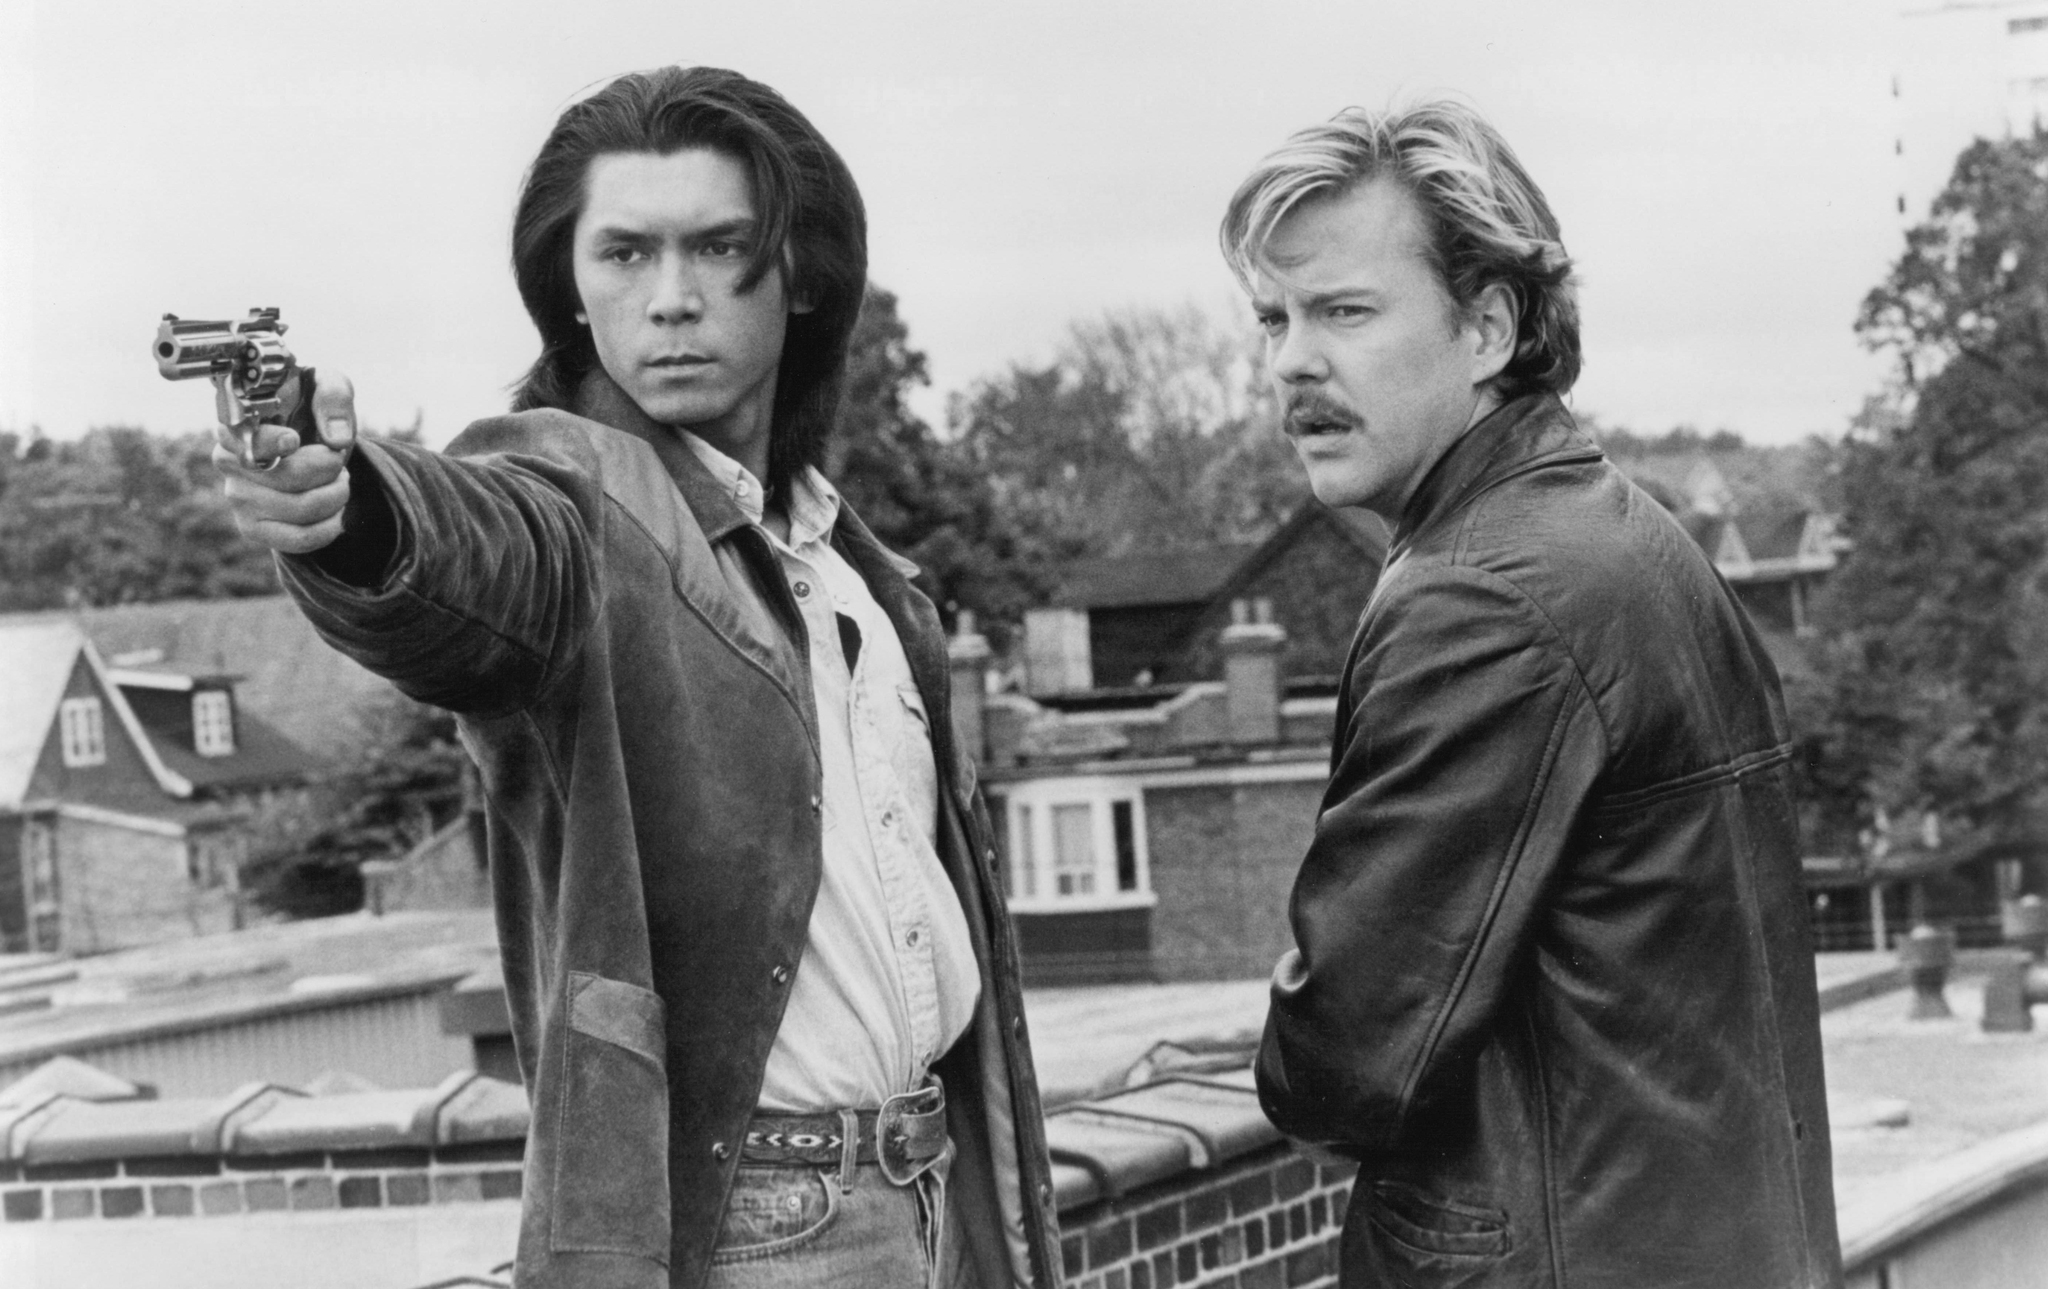 Still of Kiefer Sutherland and Lou Diamond Phillips in Renegades (1989)